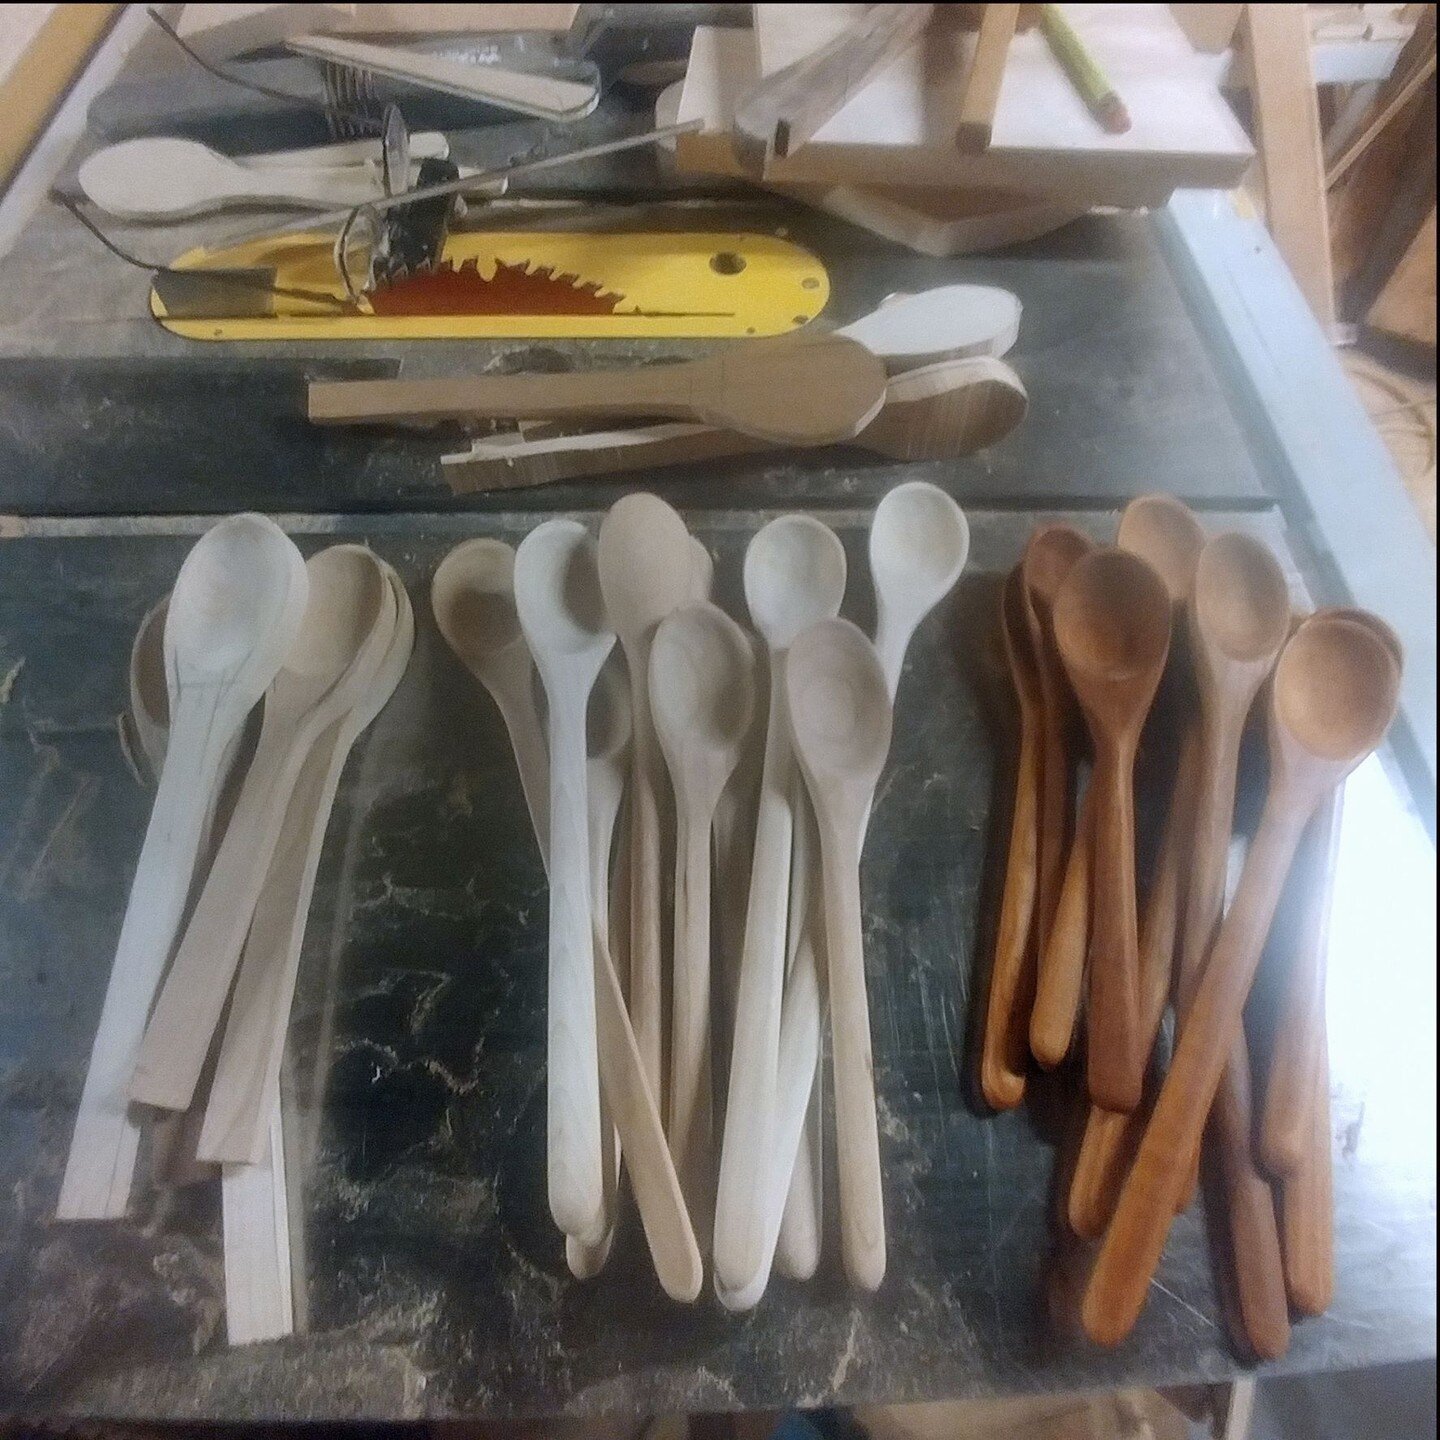 Ruffed out spoons for display at the Cooperstown Farmers Market